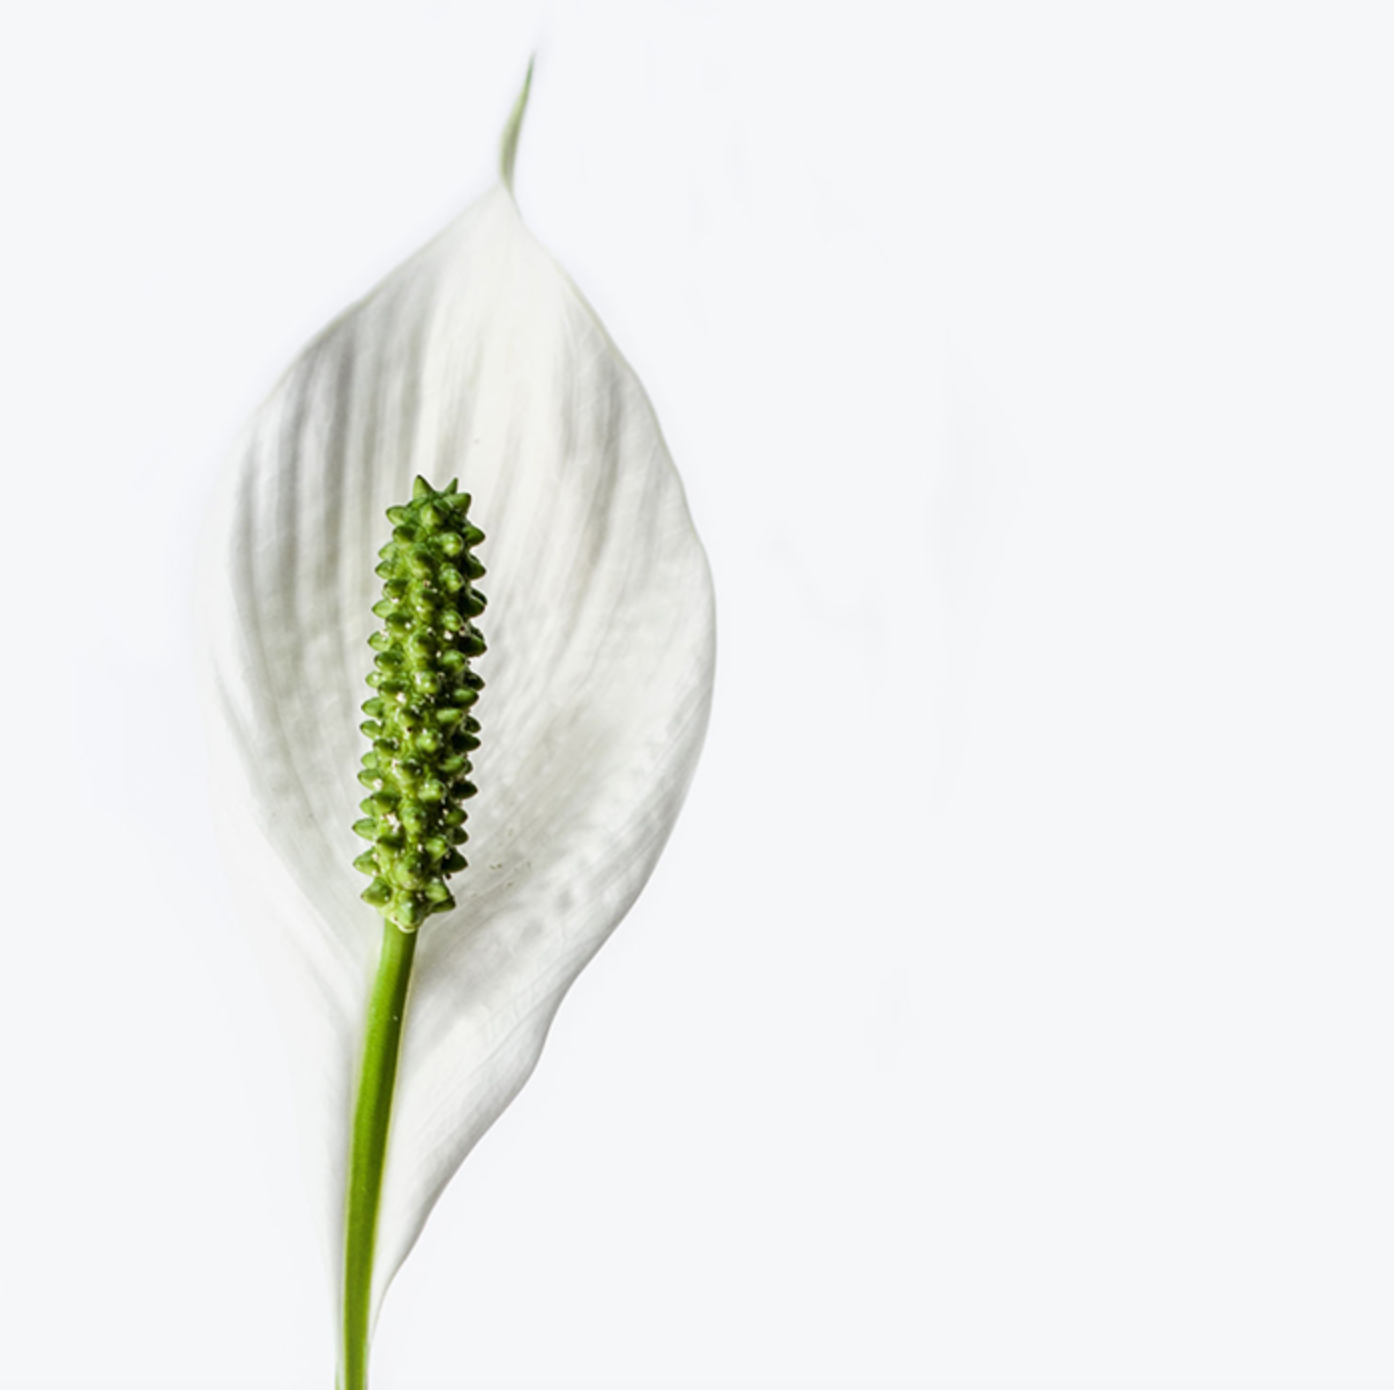 Image of a single white Peace Lily against a white background.